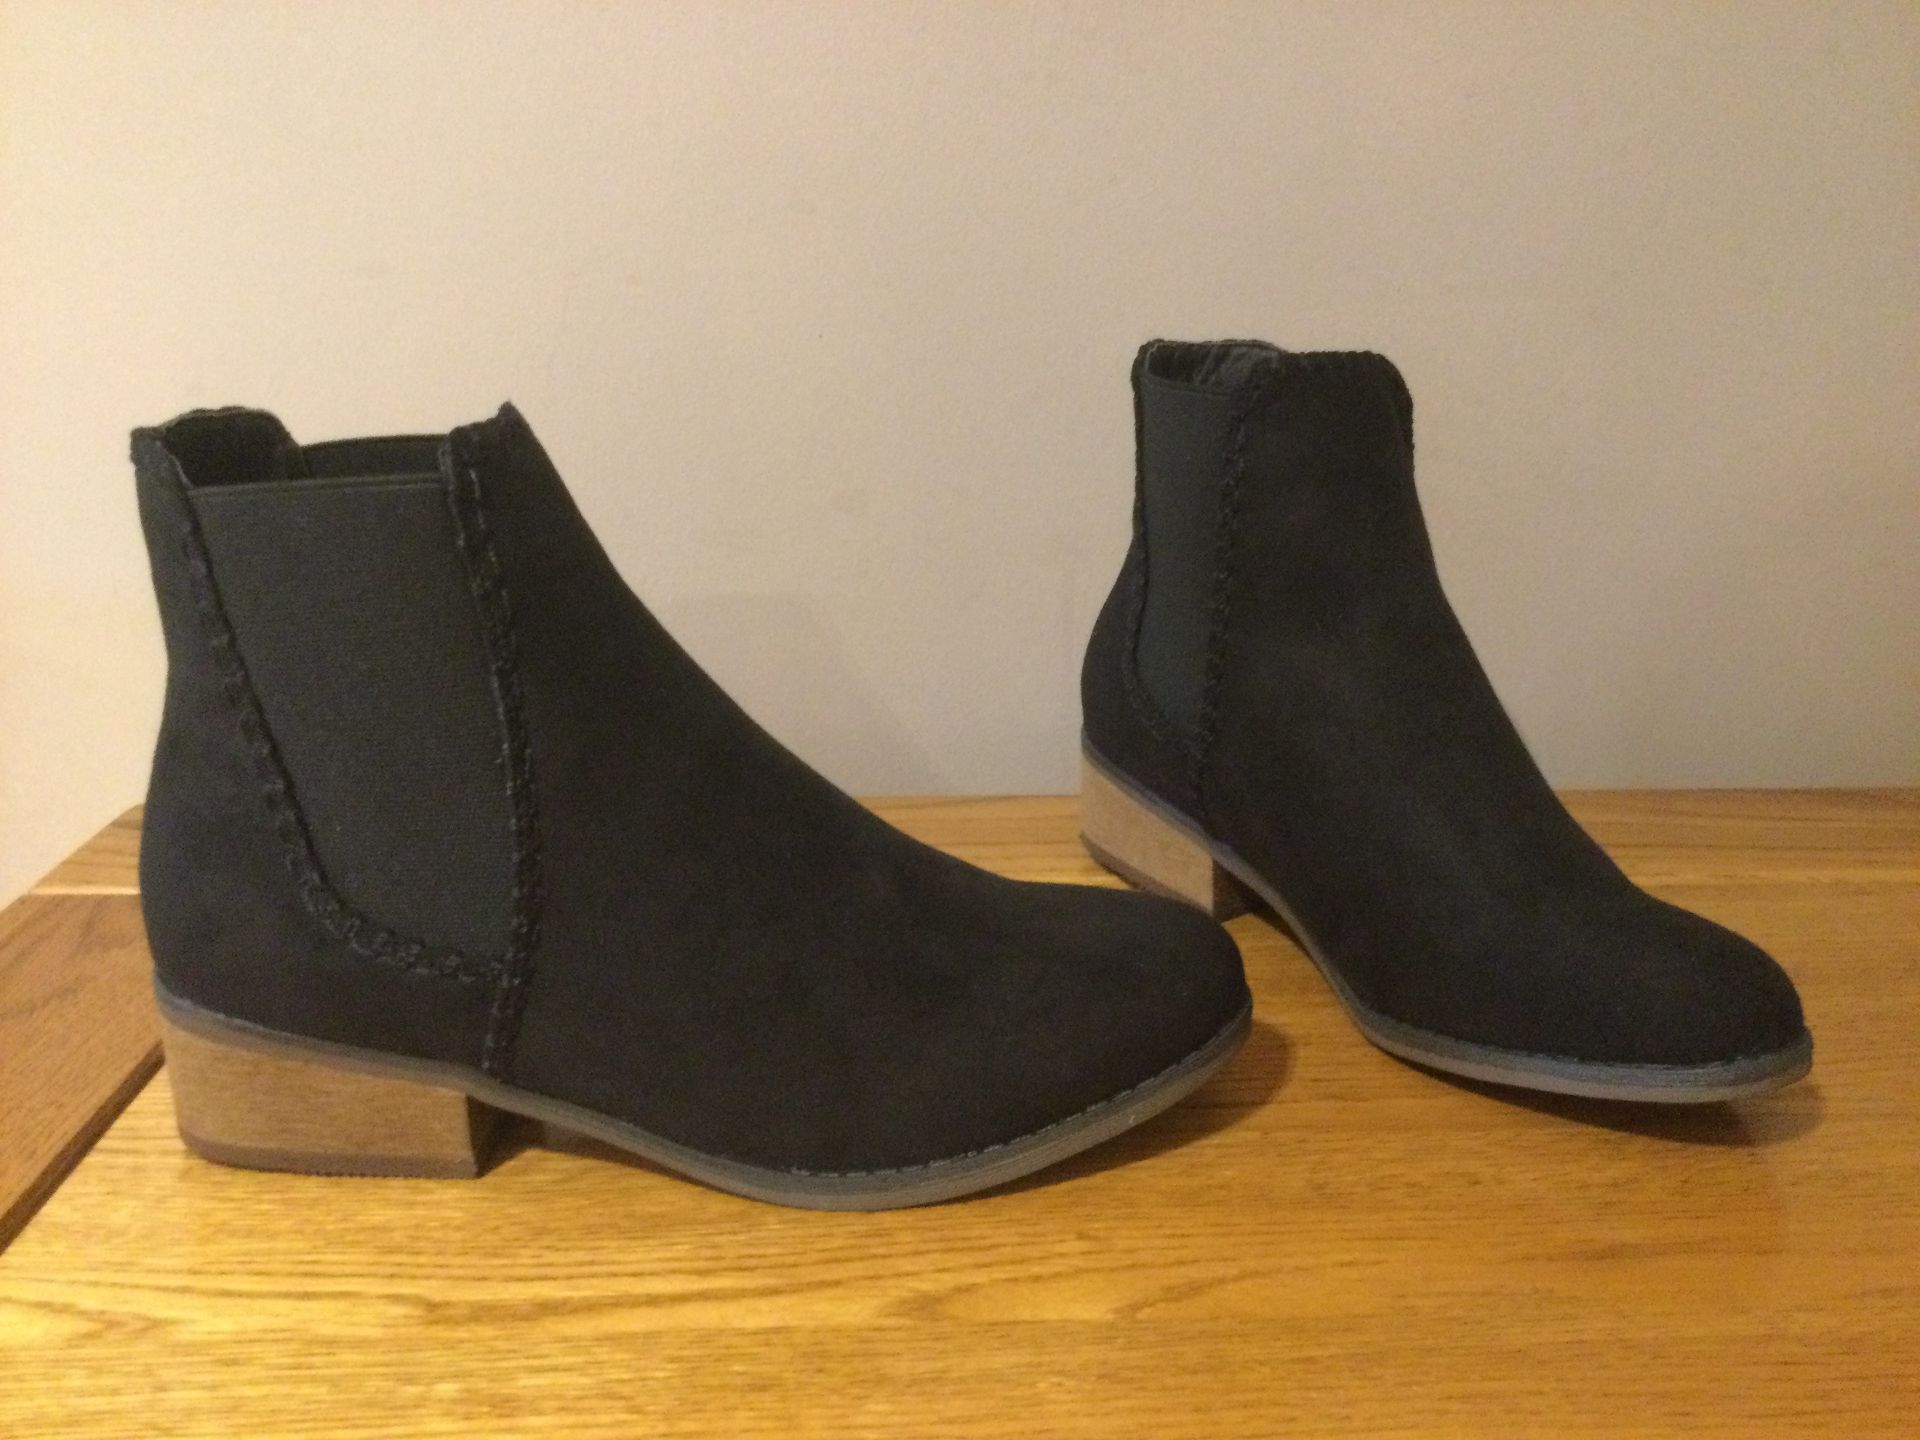 Dolcis “Pasha” Low Heel Ankle Boots, Size 3, Black - New RRP £45.99 - Image 2 of 6